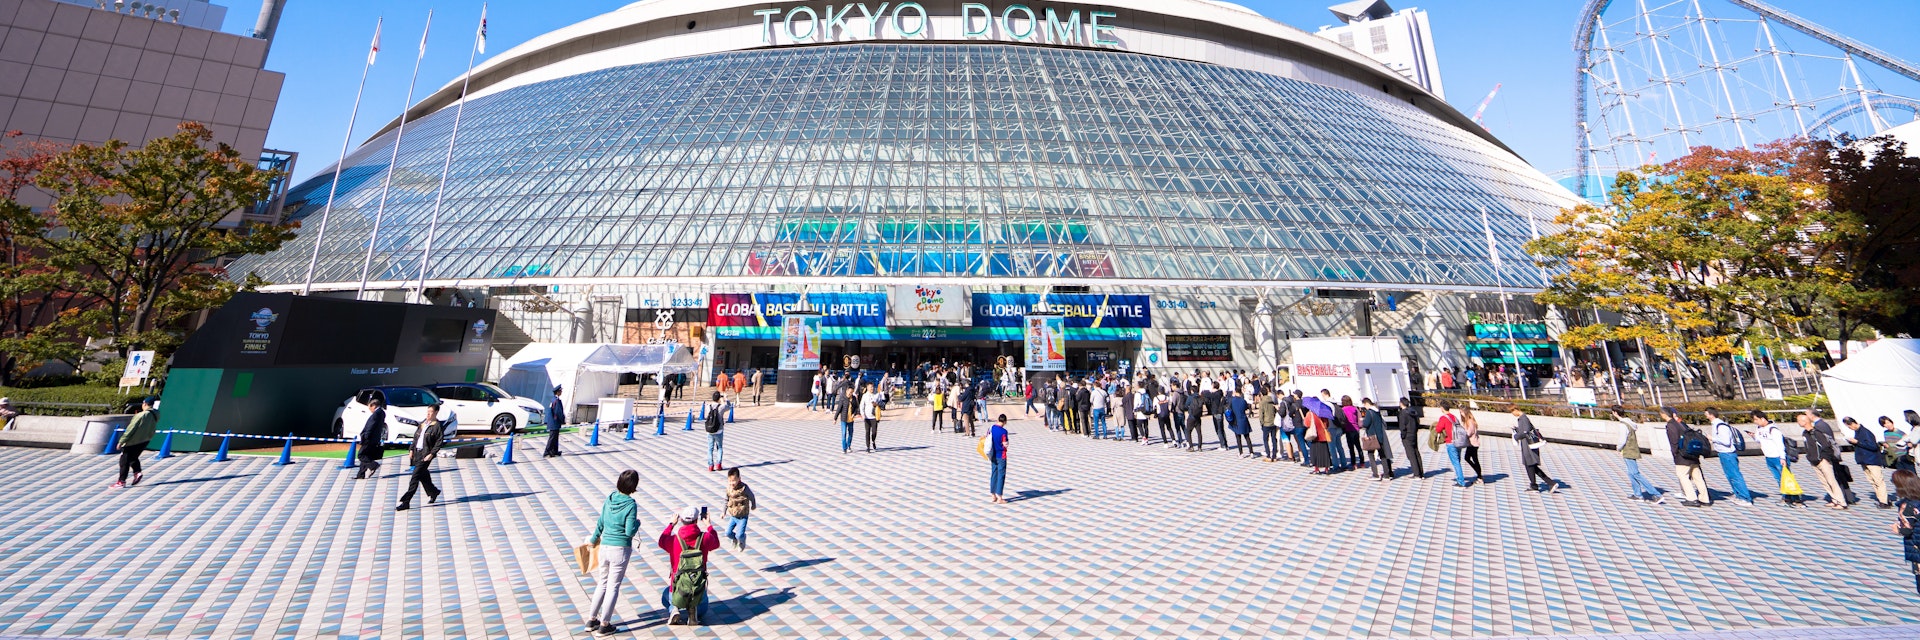 TOKYO, JAPAN - November 15, 2019: Tokyo Dome: Tokyo Dome is a stadium in Bunkyo, Tokyo, Japan. It has a maximum total capacity of 55,000. World Baseball Softball Confederation(WBSC Premier12); Shutterstock ID 1622269975; your: Bridget Brown; gl: 65050; netsuite: Online Editorial; full: POI Image Update